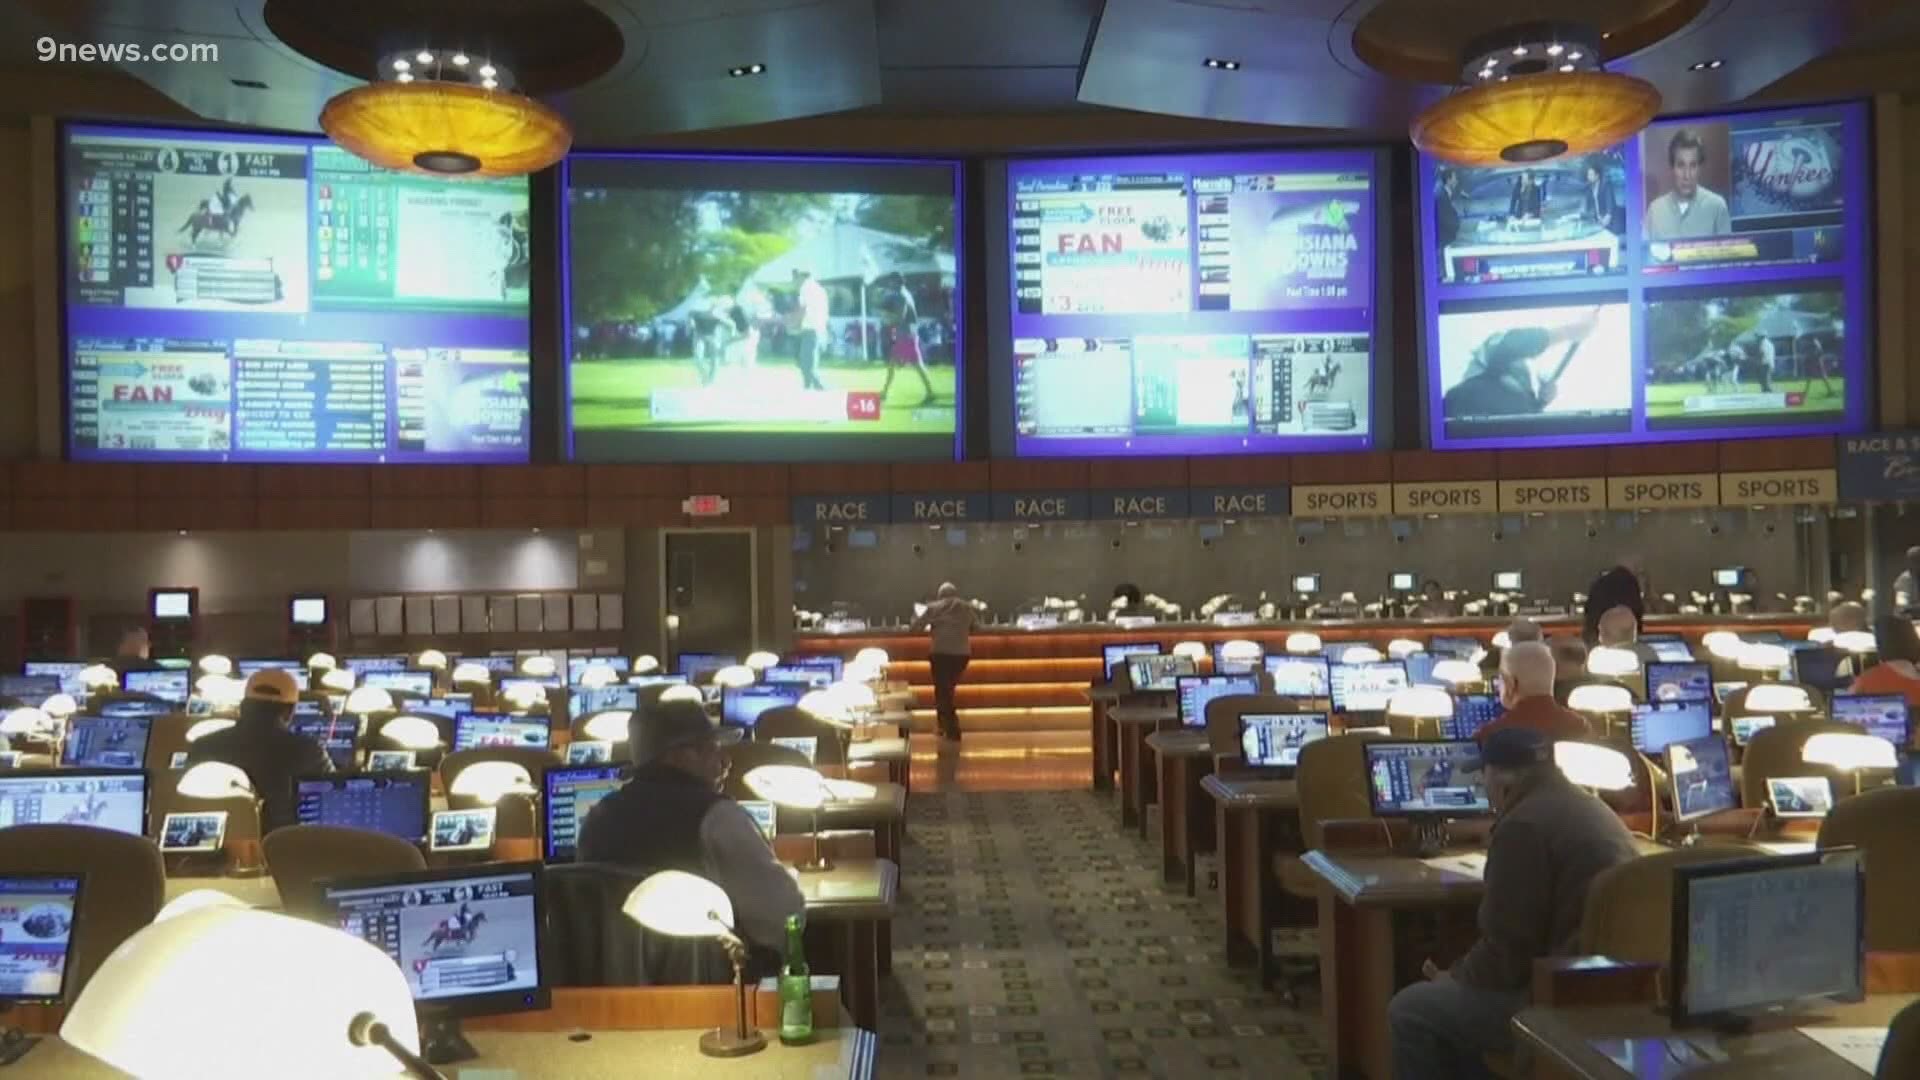 Sports betting legal in Colorado starting Friday ...